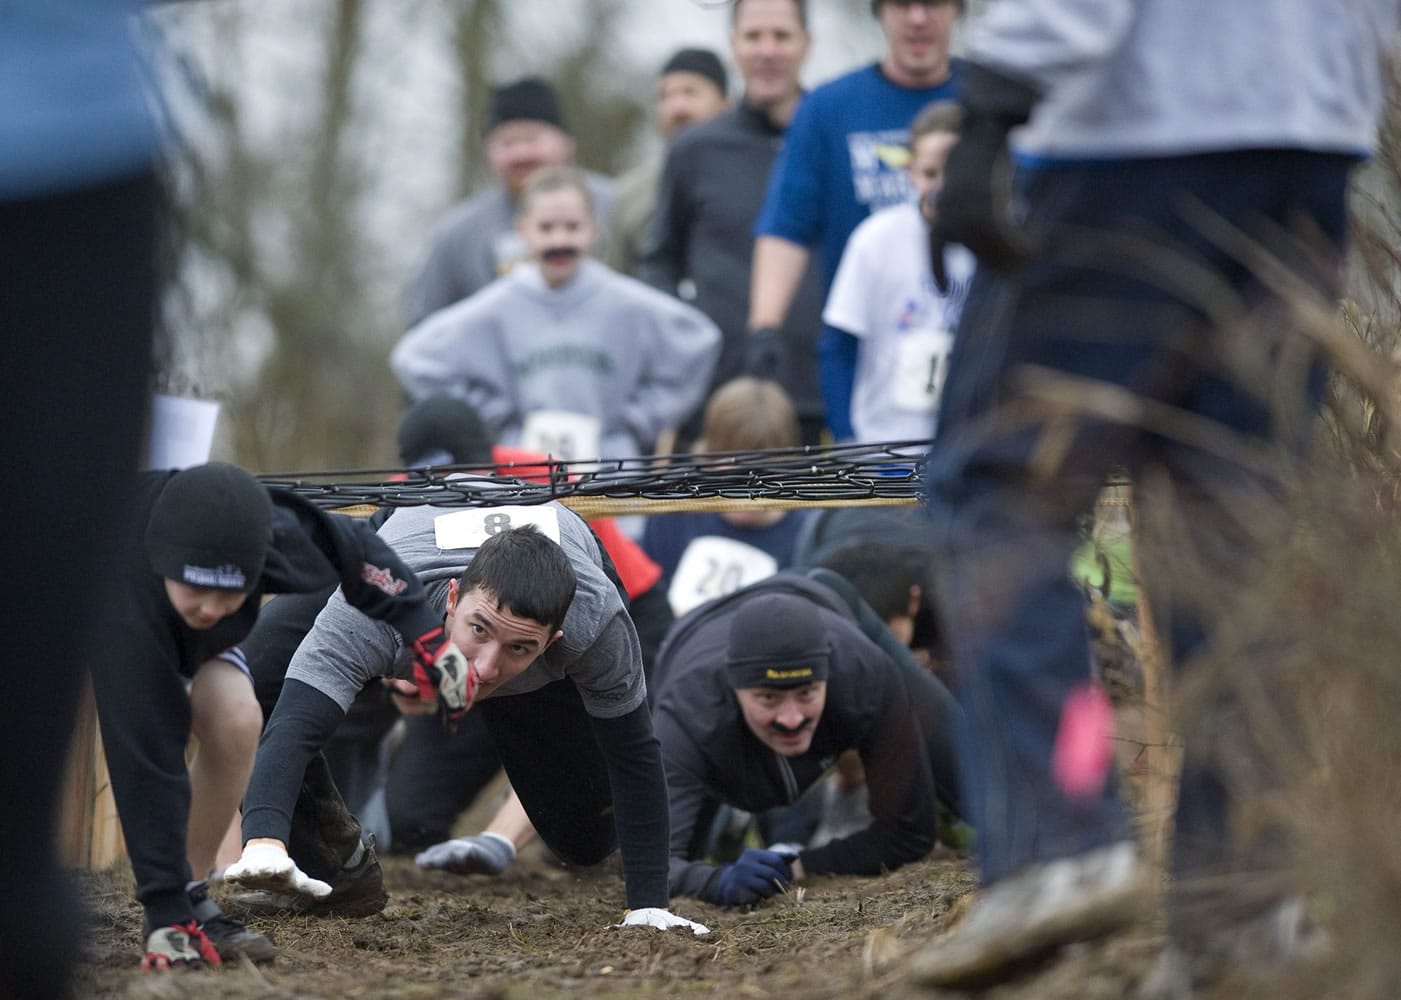 Participants go underneath an obstacle during the March Muddy Madness race that puts runners through a cross country course filled with mud, both natural and man-made obstacles and blackberry bushes on a farm in Felida.